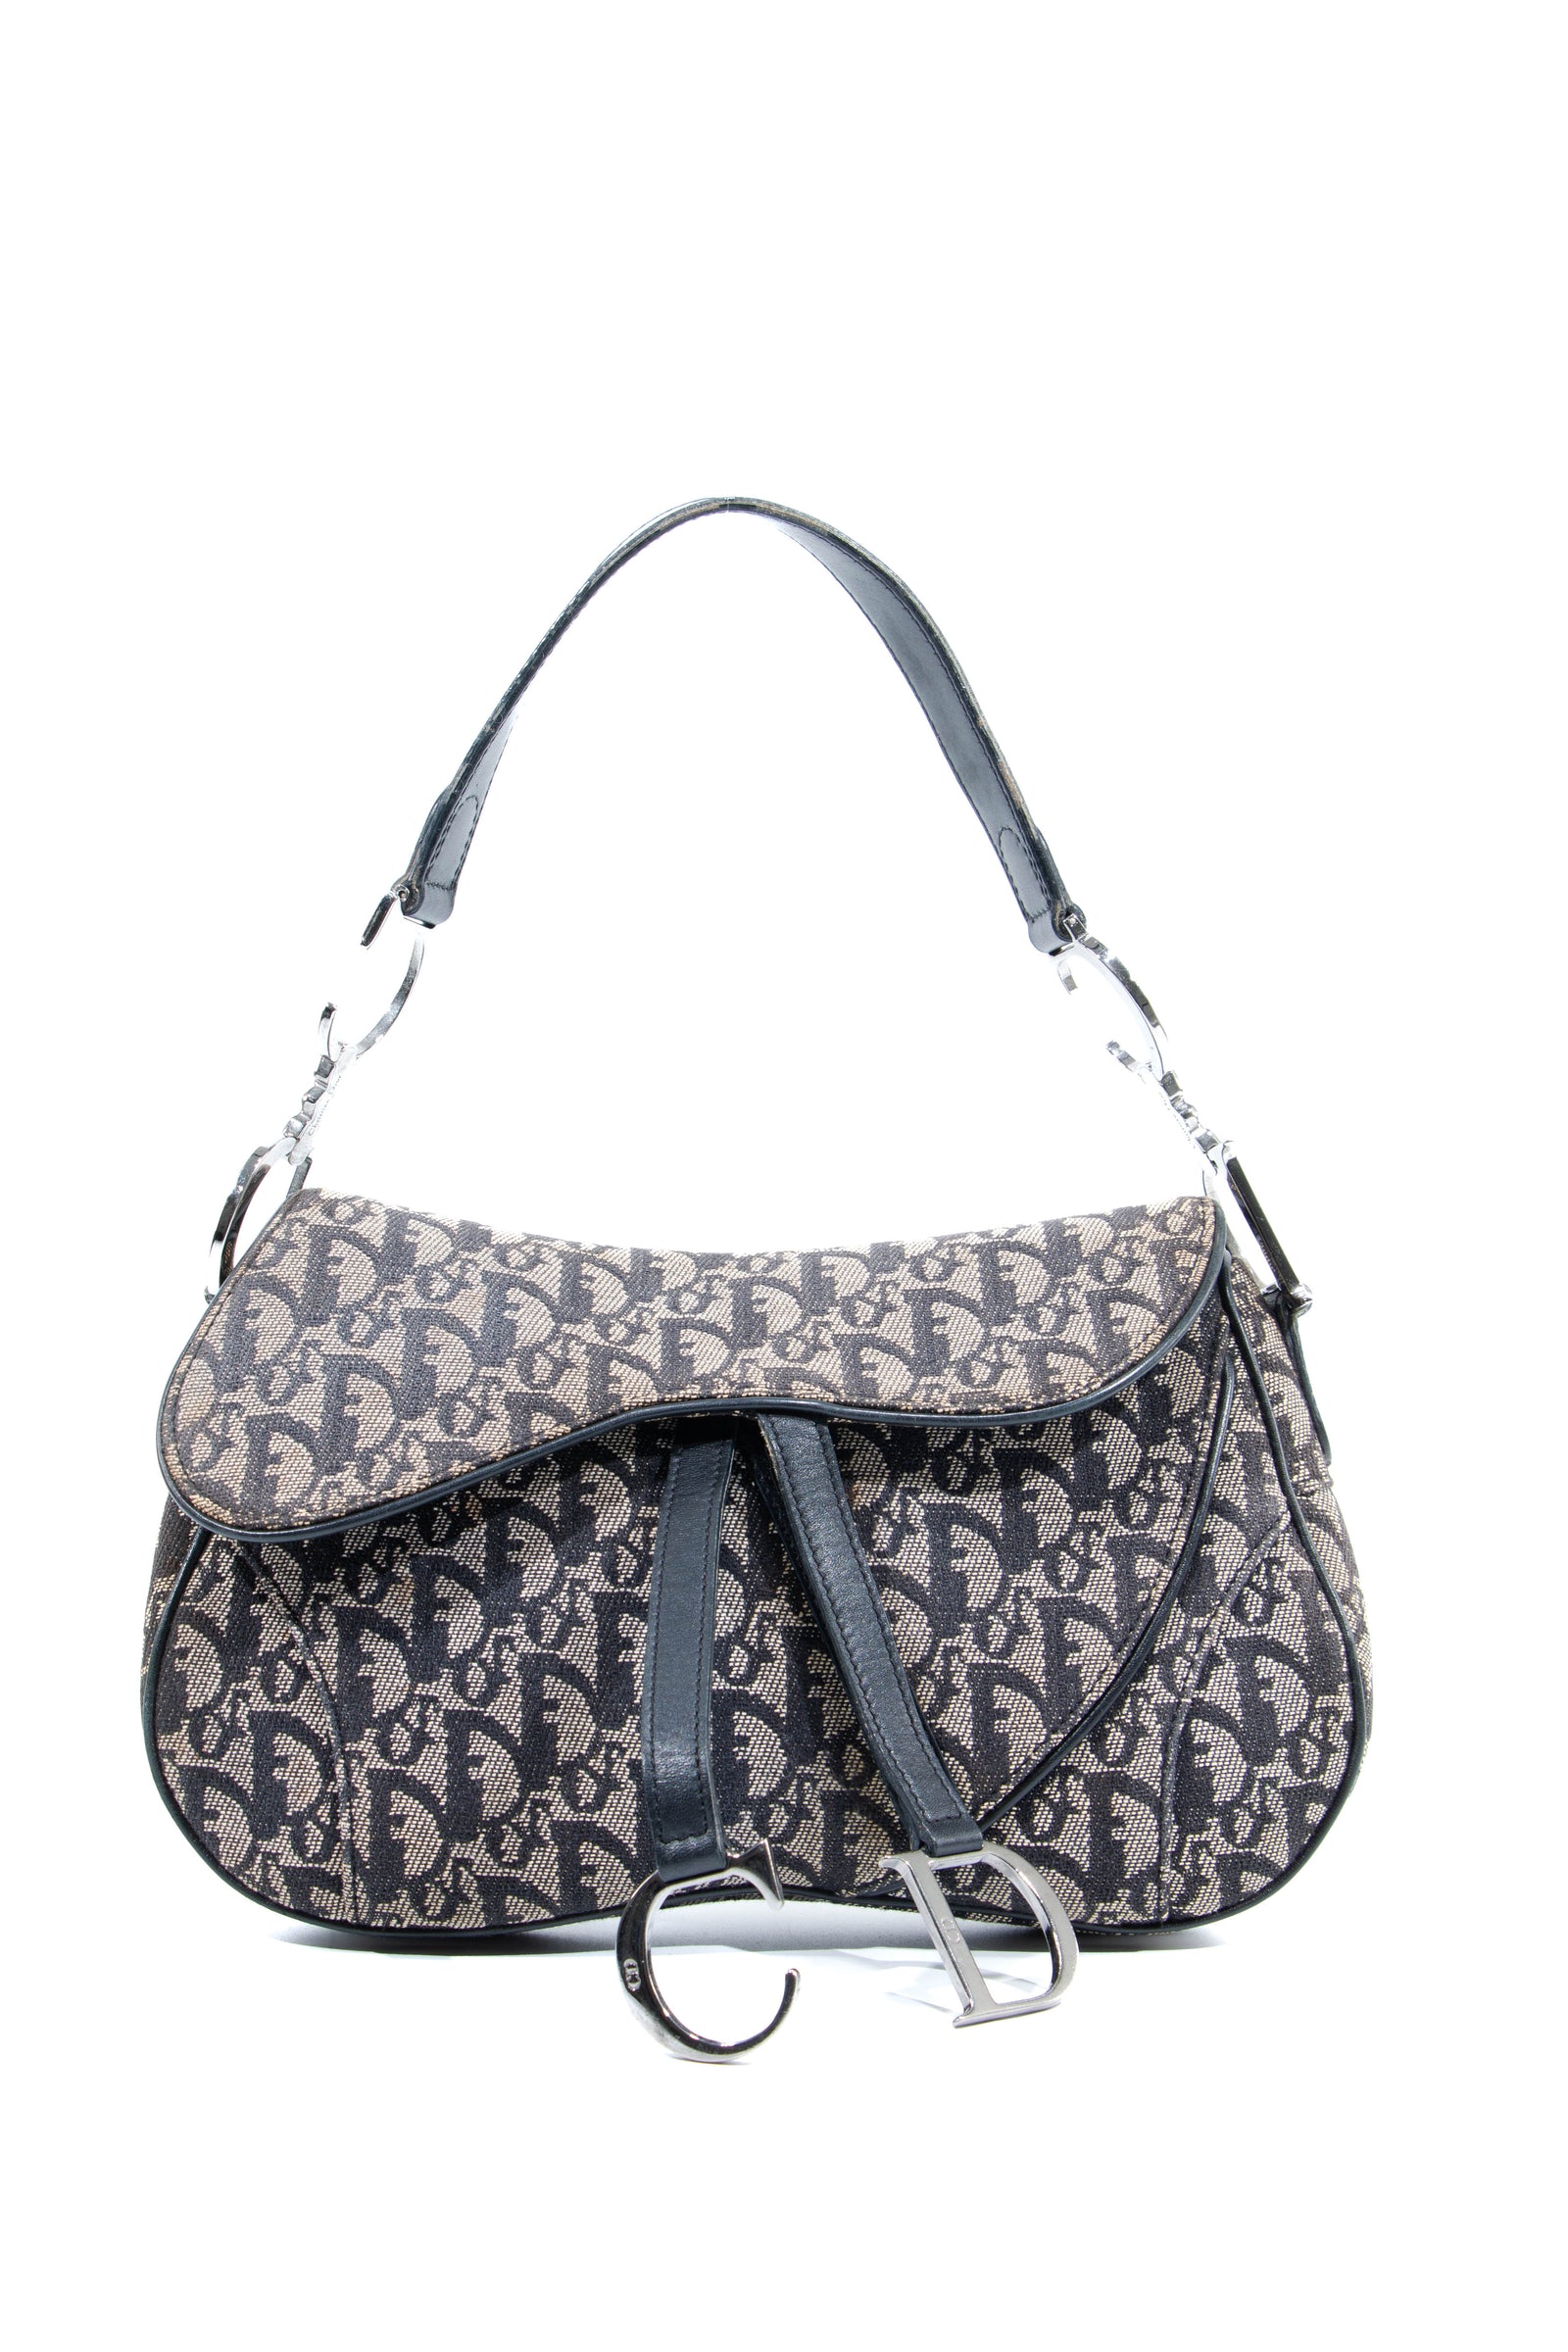 Christian Dior Bags - Find your next Christian Dior Bag at Collector's Cage  – Collectors cage